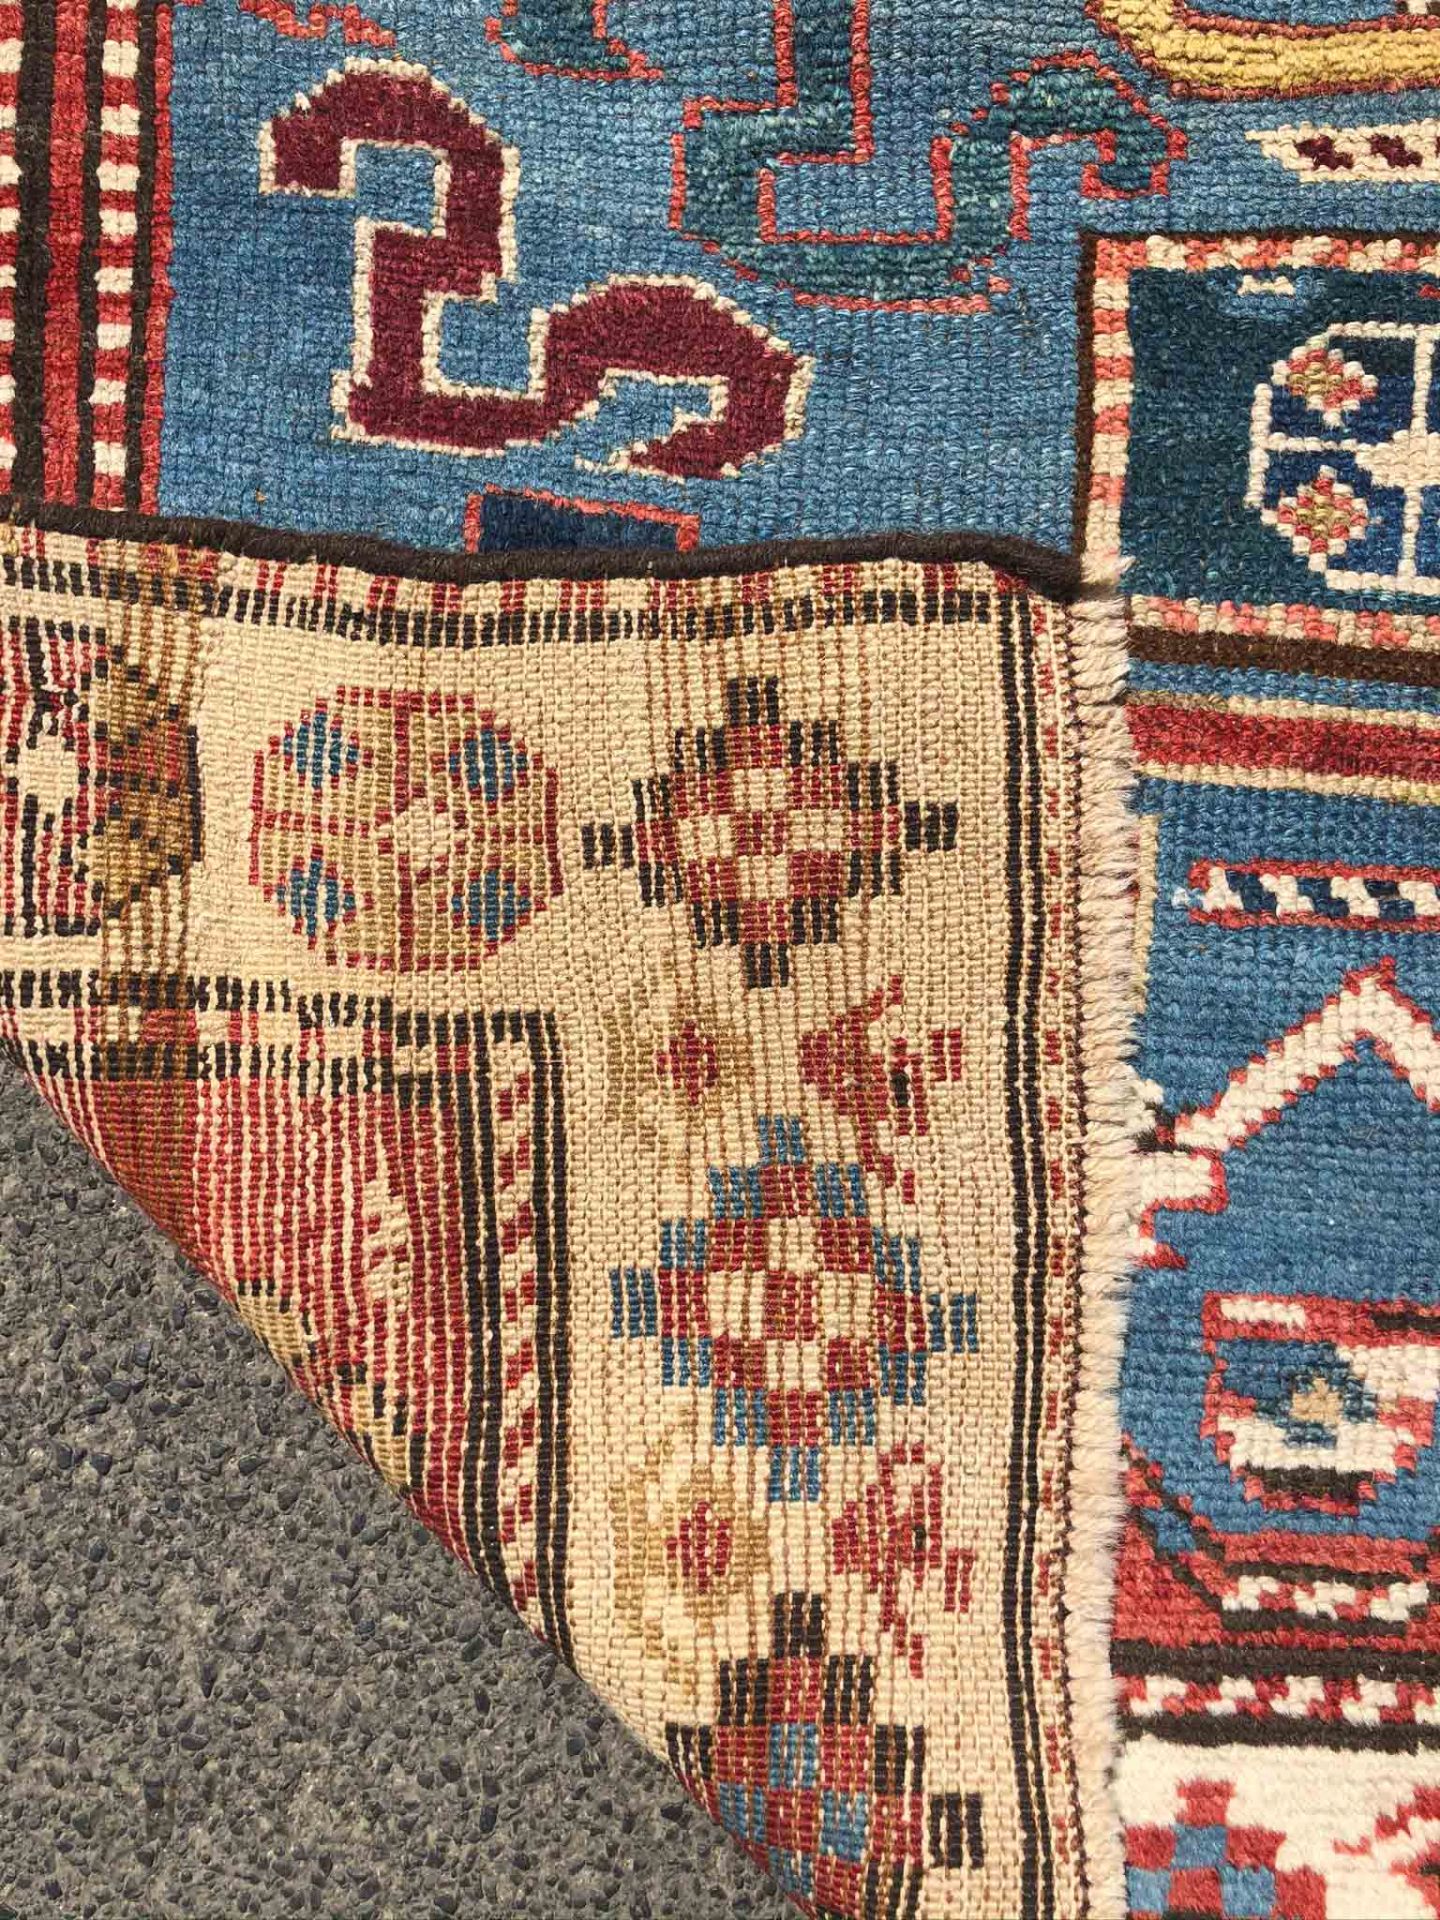 Shah - Savan tribal rug. Caucasus. Antique, probably 1828.254 cm x 105 cm. Knotted by hand. Wool - Image 10 of 10